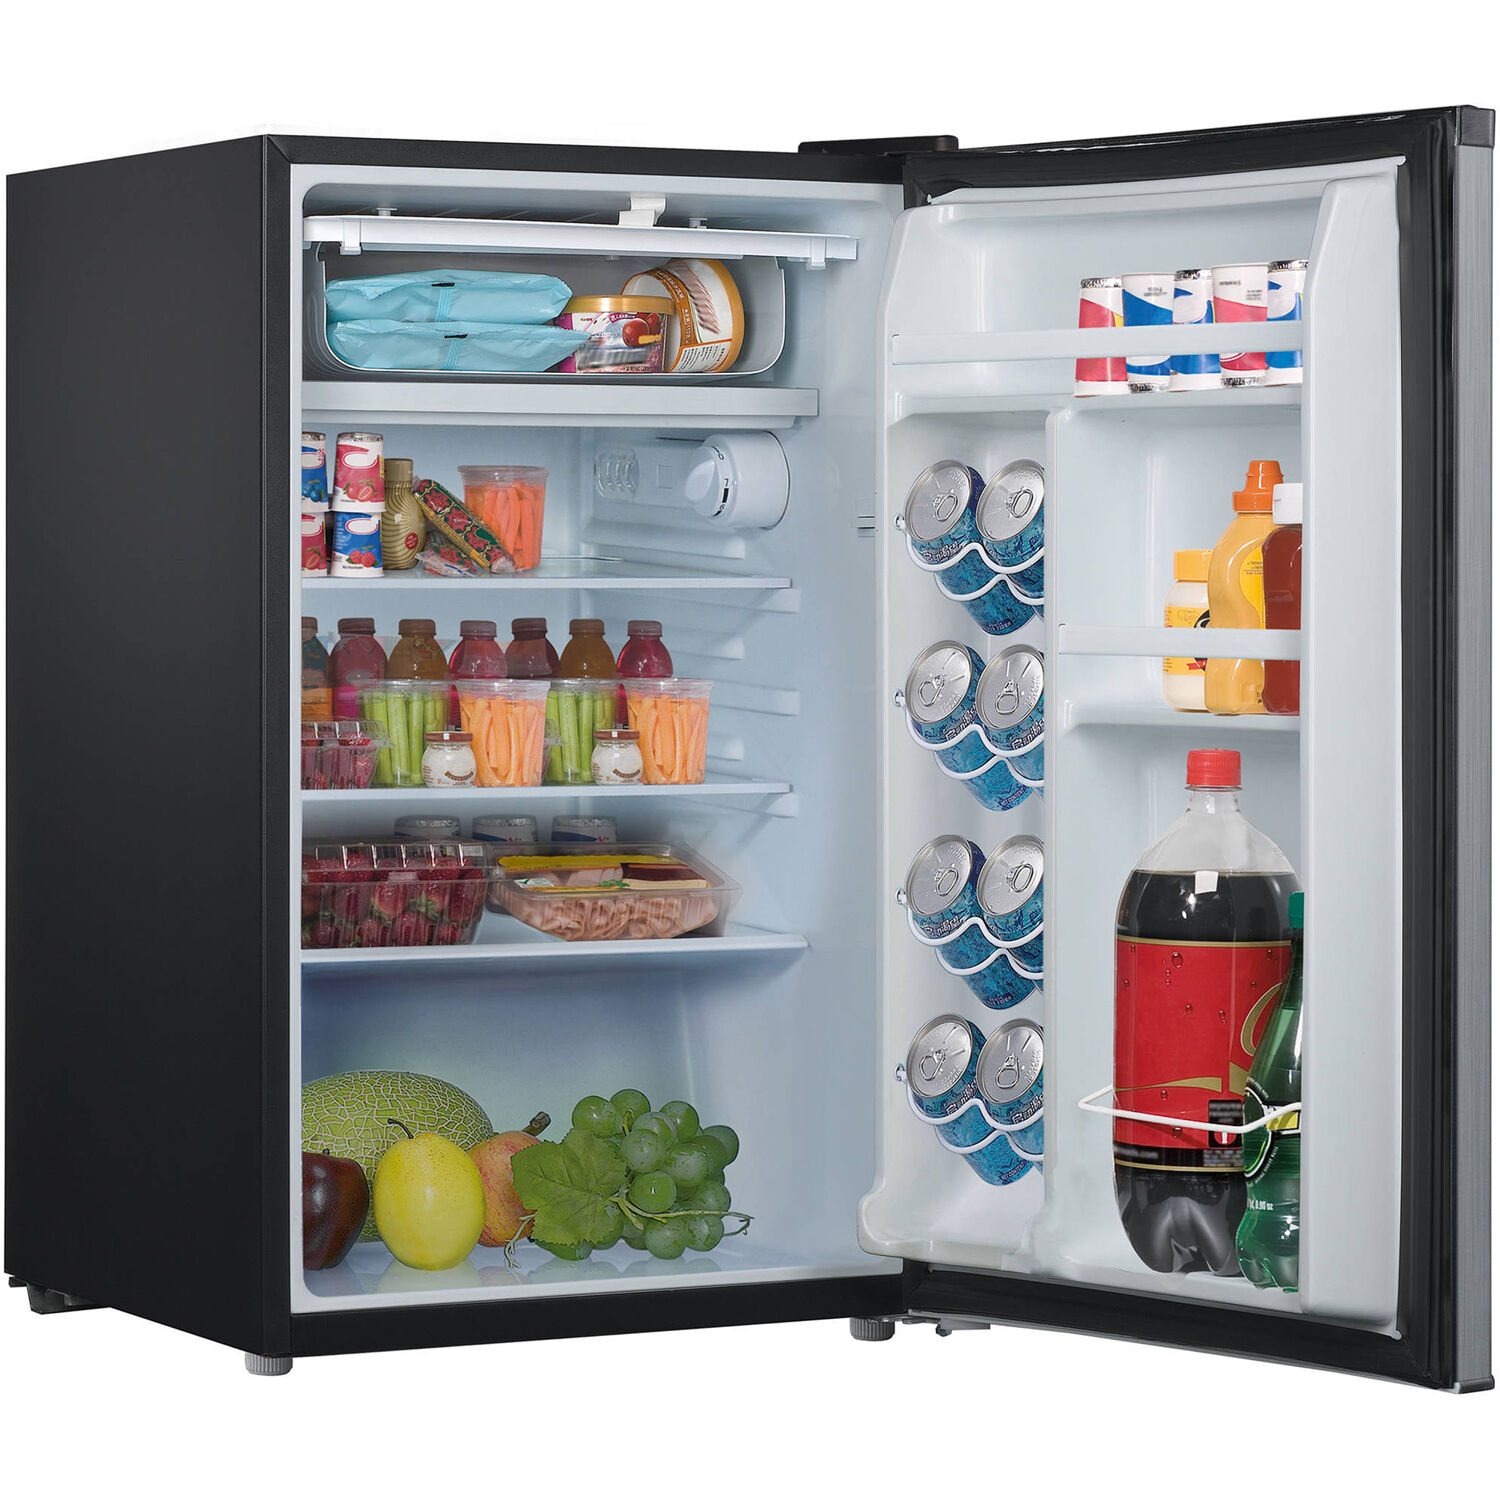 Amana Energy Star 4.3-Cu. Ft. Single-Door Mini Refrigerator with Full-Width Chiller Compartment, Black - image 3 of 5